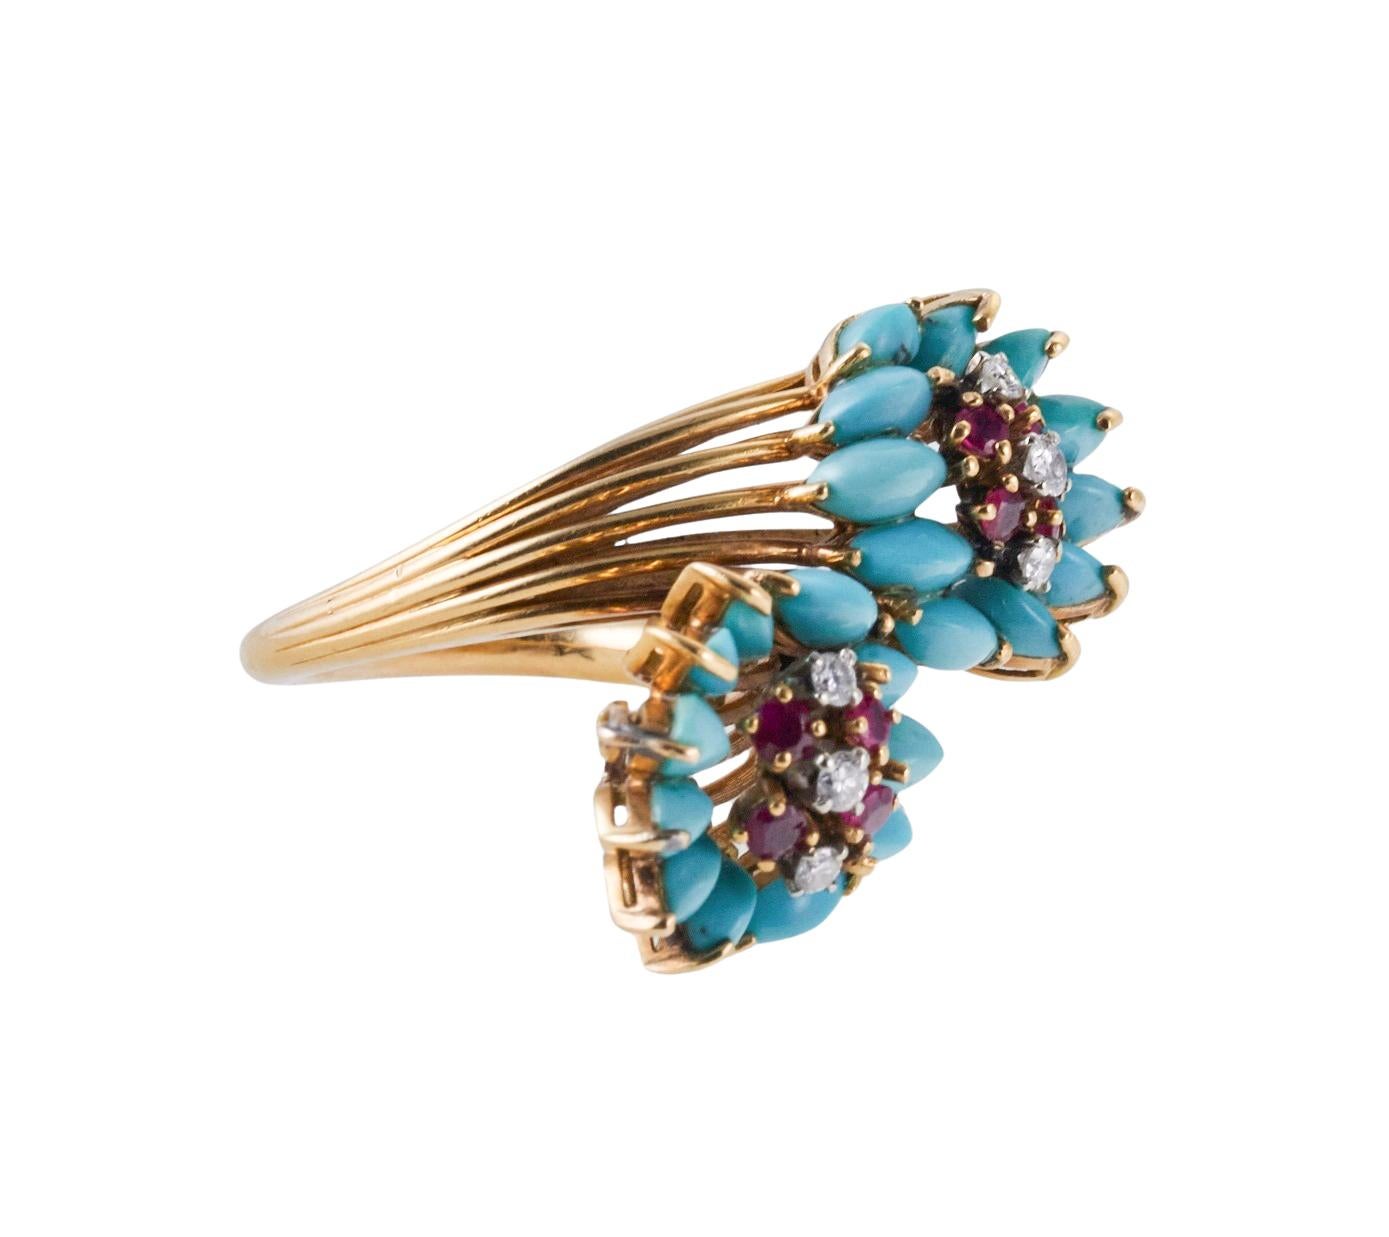 Vintage, circa 1960s 18k gold bypass cocktail ring, featuring vibrant colors of turquoise and rubies, with approx. 0.14ctw in diamonds. Ring size 6, top is 20mm x 32mm. Weight of the piece - 14 grams. 